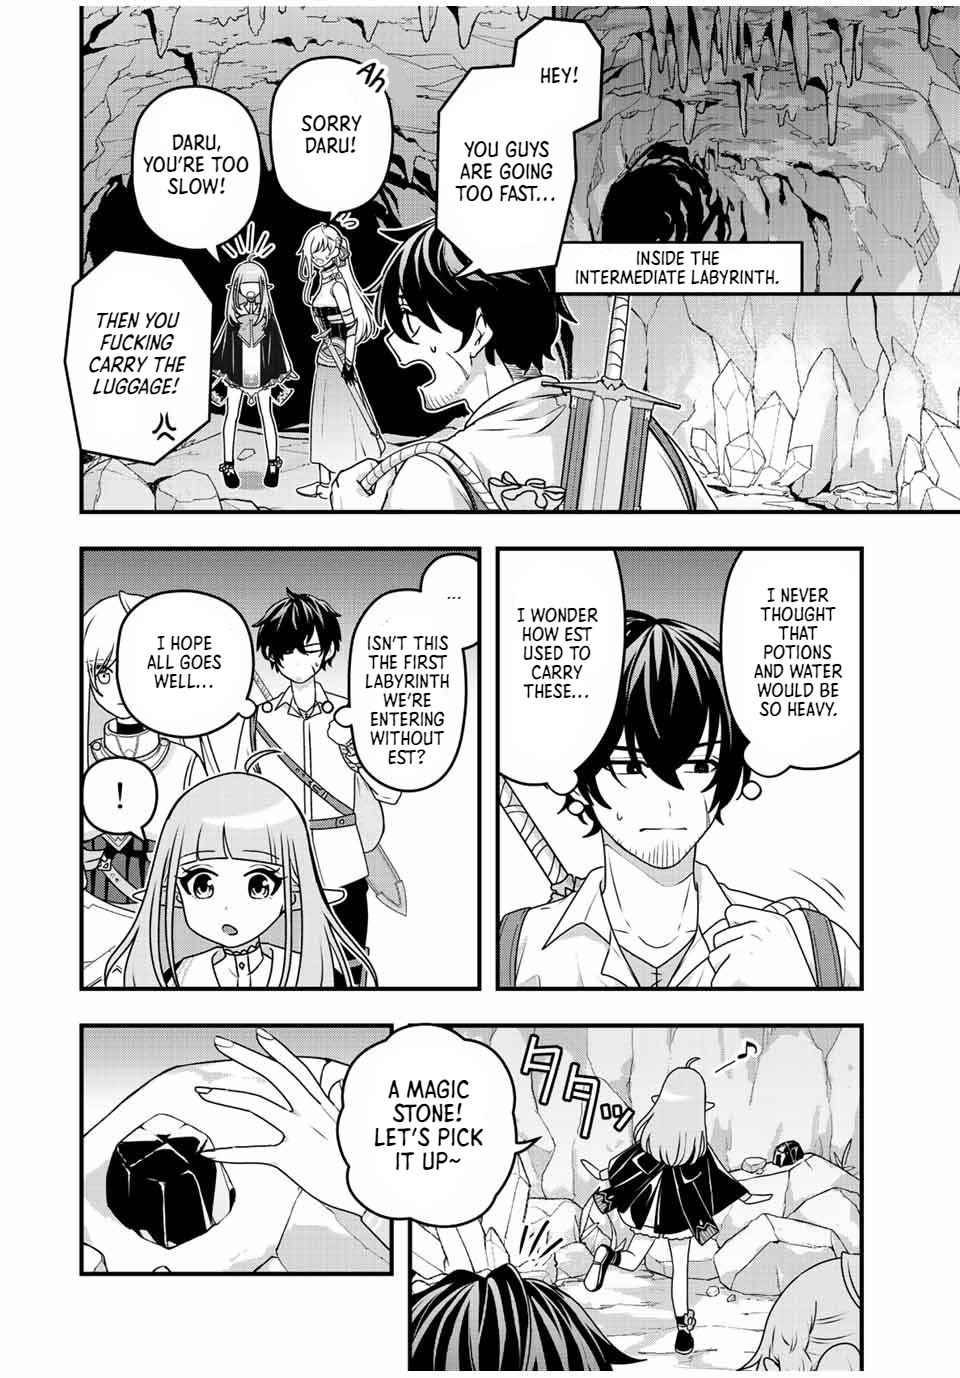 The Story Of The Banisher Side After Banishing The Party Member - The Party Was Weakened, But We Aim To Be The Best In The World Chapter 2-eng-li - Page 12